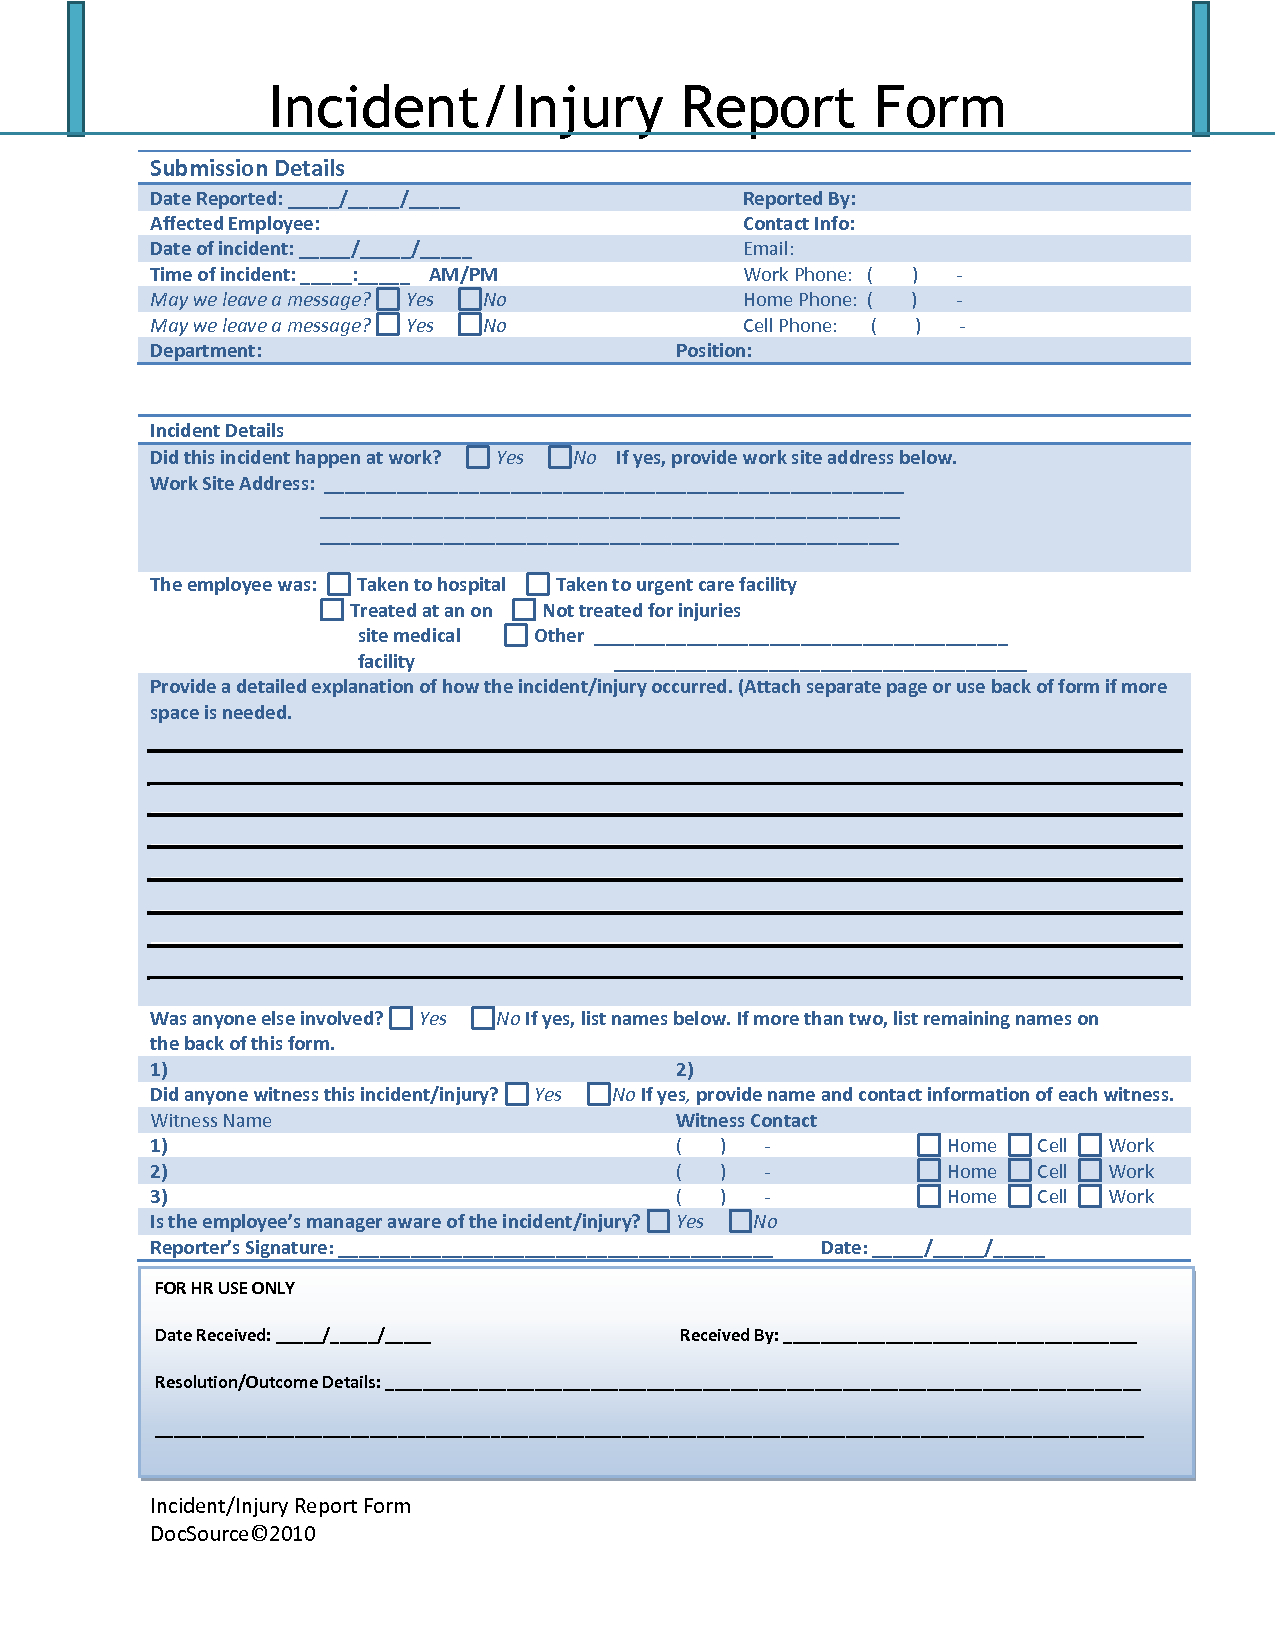 Effective Accident Injury Report Form Template With Blue Throughout Injury Report Form Template